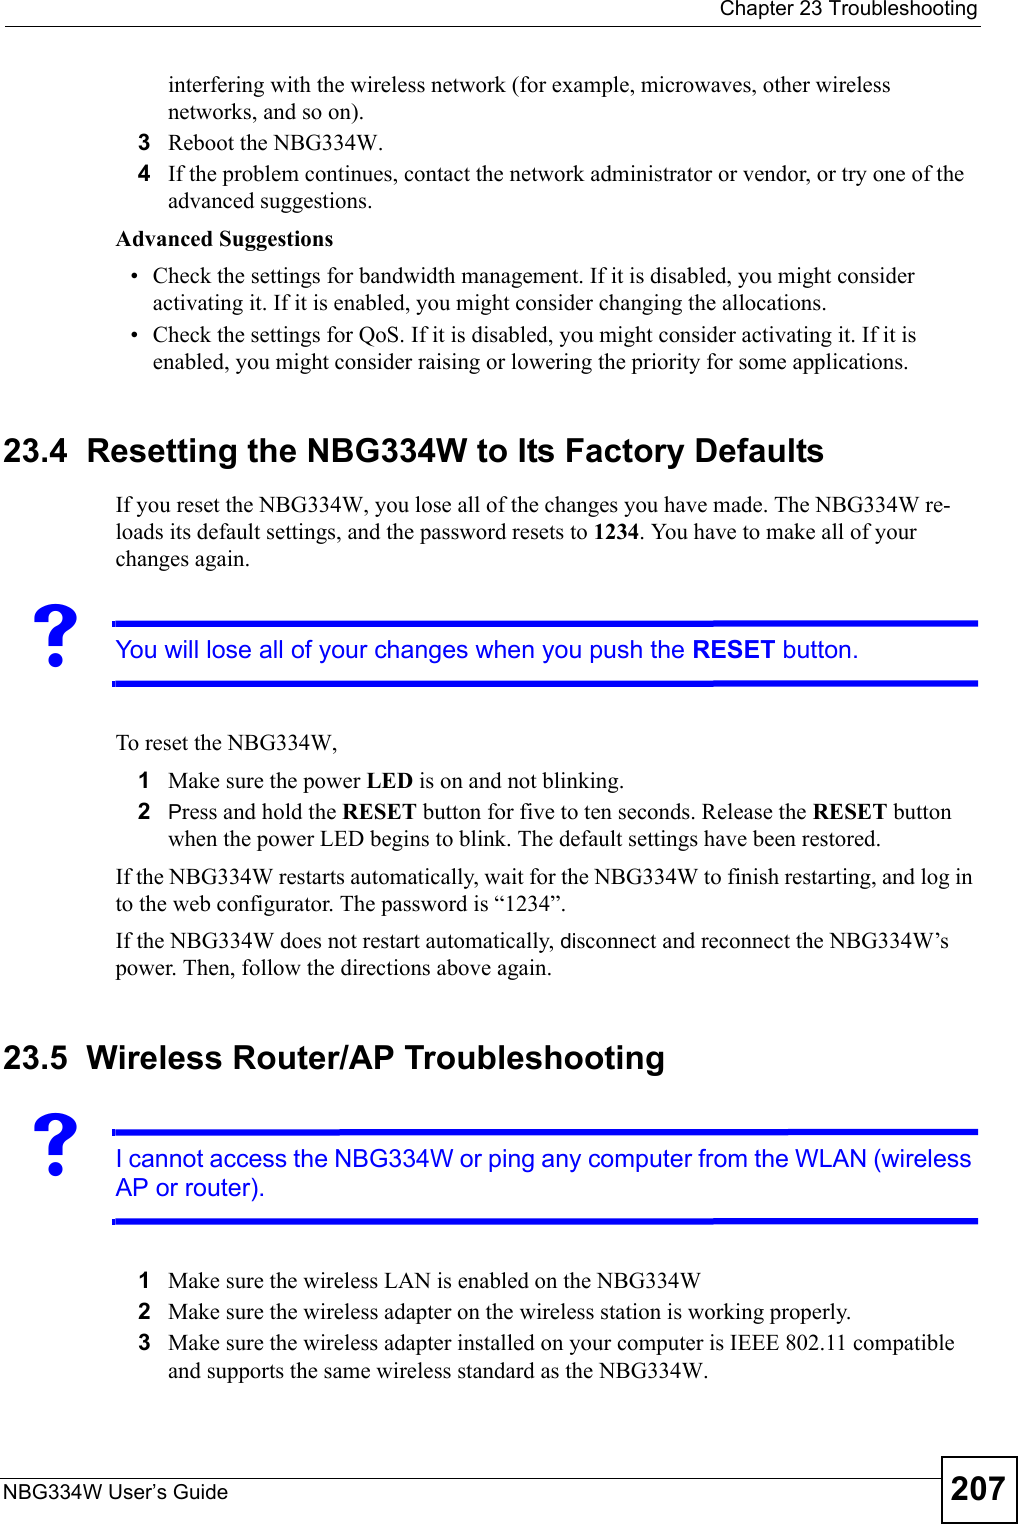  Chapter 23 TroubleshootingNBG334W User’s Guide 207interfering with the wireless network (for example, microwaves, other wireless networks, and so on).3Reboot the NBG334W.4If the problem continues, contact the network administrator or vendor, or try one of the advanced suggestions.Advanced Suggestions• Check the settings for bandwidth management. If it is disabled, you might consider activating it. If it is enabled, you might consider changing the allocations. • Check the settings for QoS. If it is disabled, you might consider activating it. If it is enabled, you might consider raising or lowering the priority for some applications.23.4  Resetting the NBG334W to Its Factory Defaults If you reset the NBG334W, you lose all of the changes you have made. The NBG334W re-loads its default settings, and the password resets to 1234. You have to make all of your changes again.VYou will lose all of your changes when you push the RESET button.To reset the NBG334W,1Make sure the power LED is on and not blinking. 2Press and hold the RESET button for five to ten seconds. Release the RESET button when the power LED begins to blink. The default settings have been restored.If the NBG334W restarts automatically, wait for the NBG334W to finish restarting, and log in to the web configurator. The password is “1234”.If the NBG334W does not restart automatically, disconnect and reconnect the NBG334W’s power. Then, follow the directions above again.23.5  Wireless Router/AP TroubleshootingVI cannot access the NBG334W or ping any computer from the WLAN (wireless AP or router).1Make sure the wireless LAN is enabled on the NBG334W2Make sure the wireless adapter on the wireless station is working properly.3Make sure the wireless adapter installed on your computer is IEEE 802.11 compatible and supports the same wireless standard as the NBG334W.